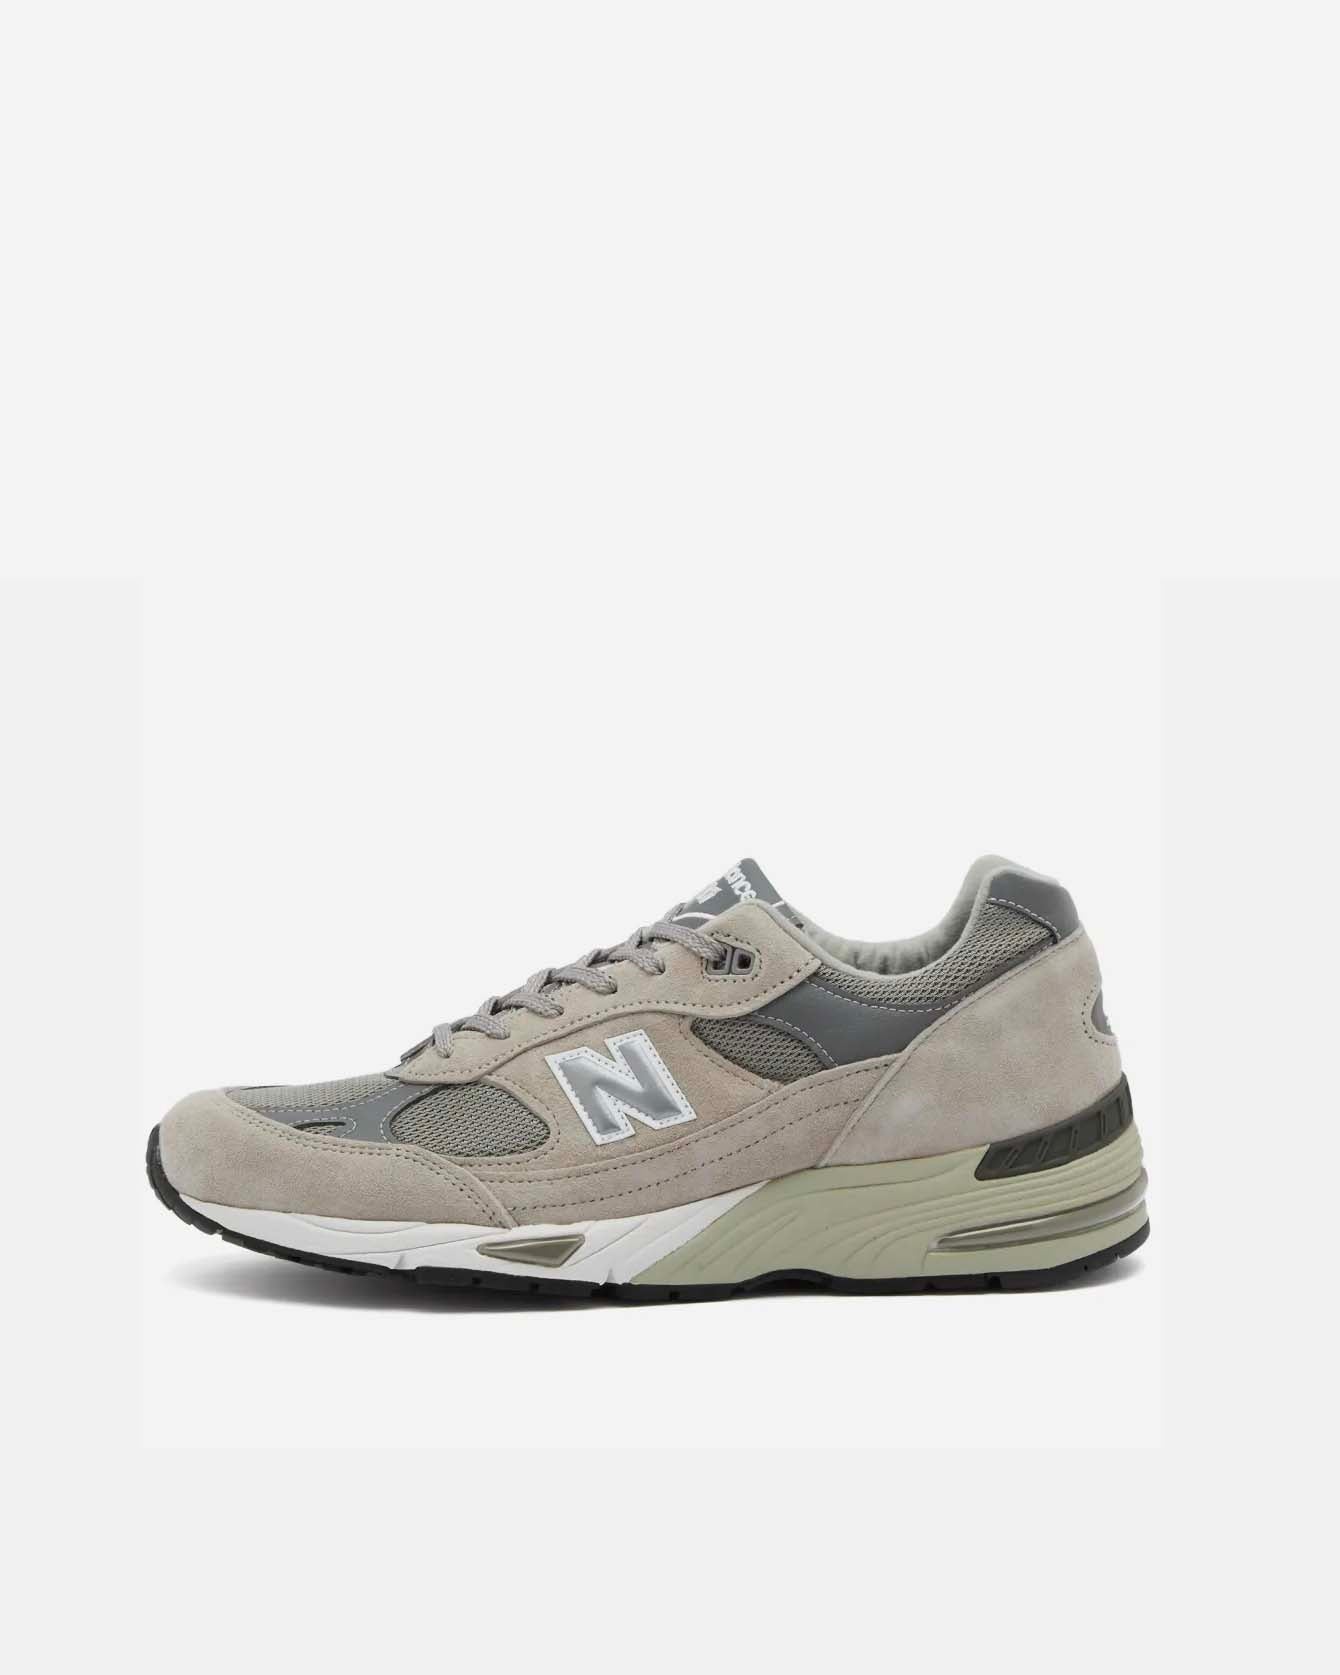 new balance m991 gl made in england 